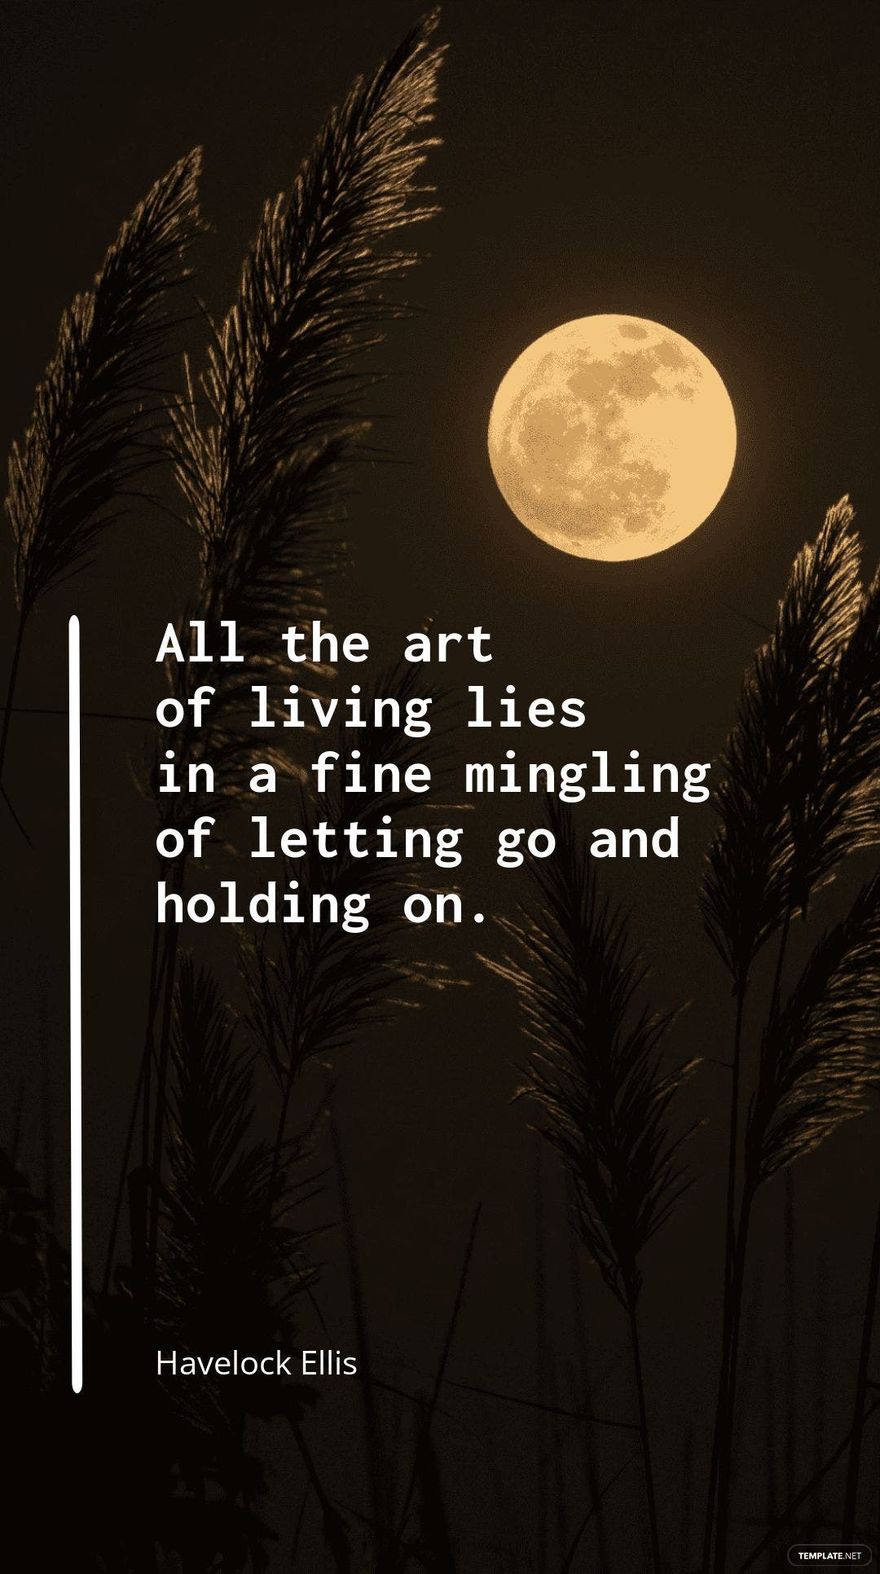 Havelock Ellis - "All the art of living lies in a fine mingling of letting go and holding on."